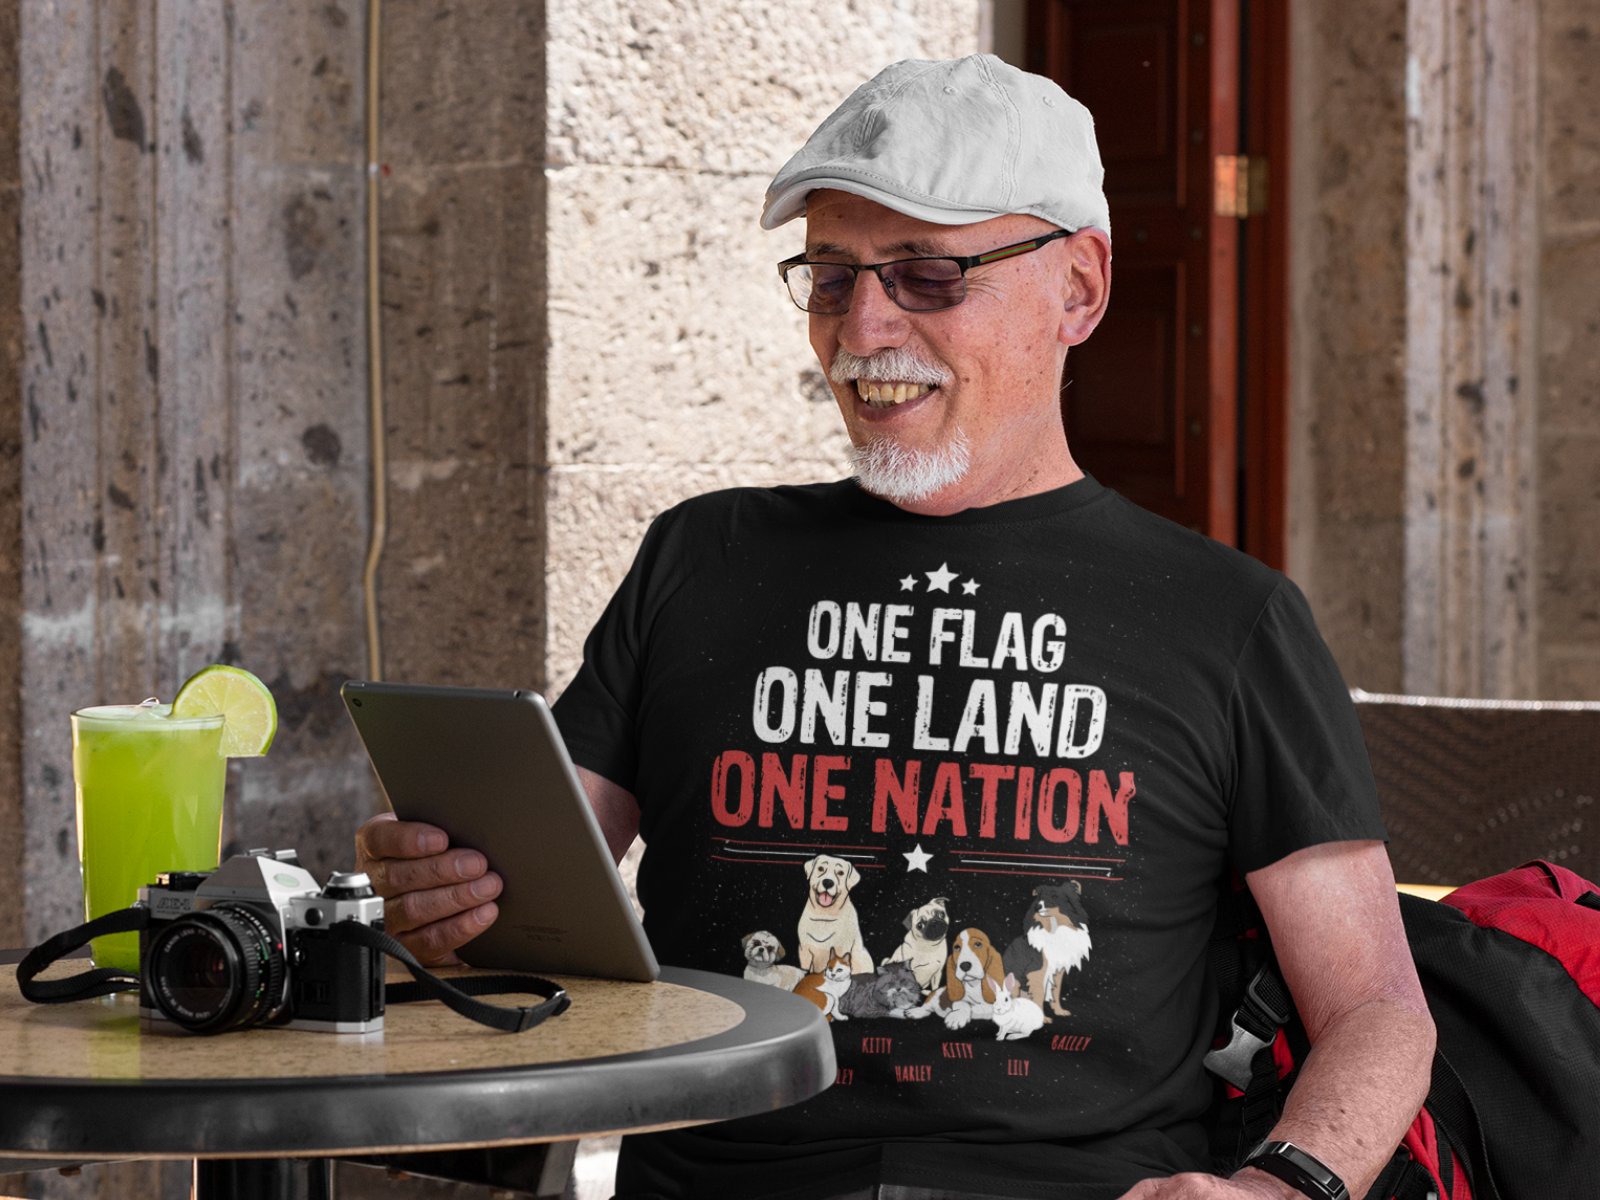 One Flag, One Land, One Nation Tee For Pet Parents